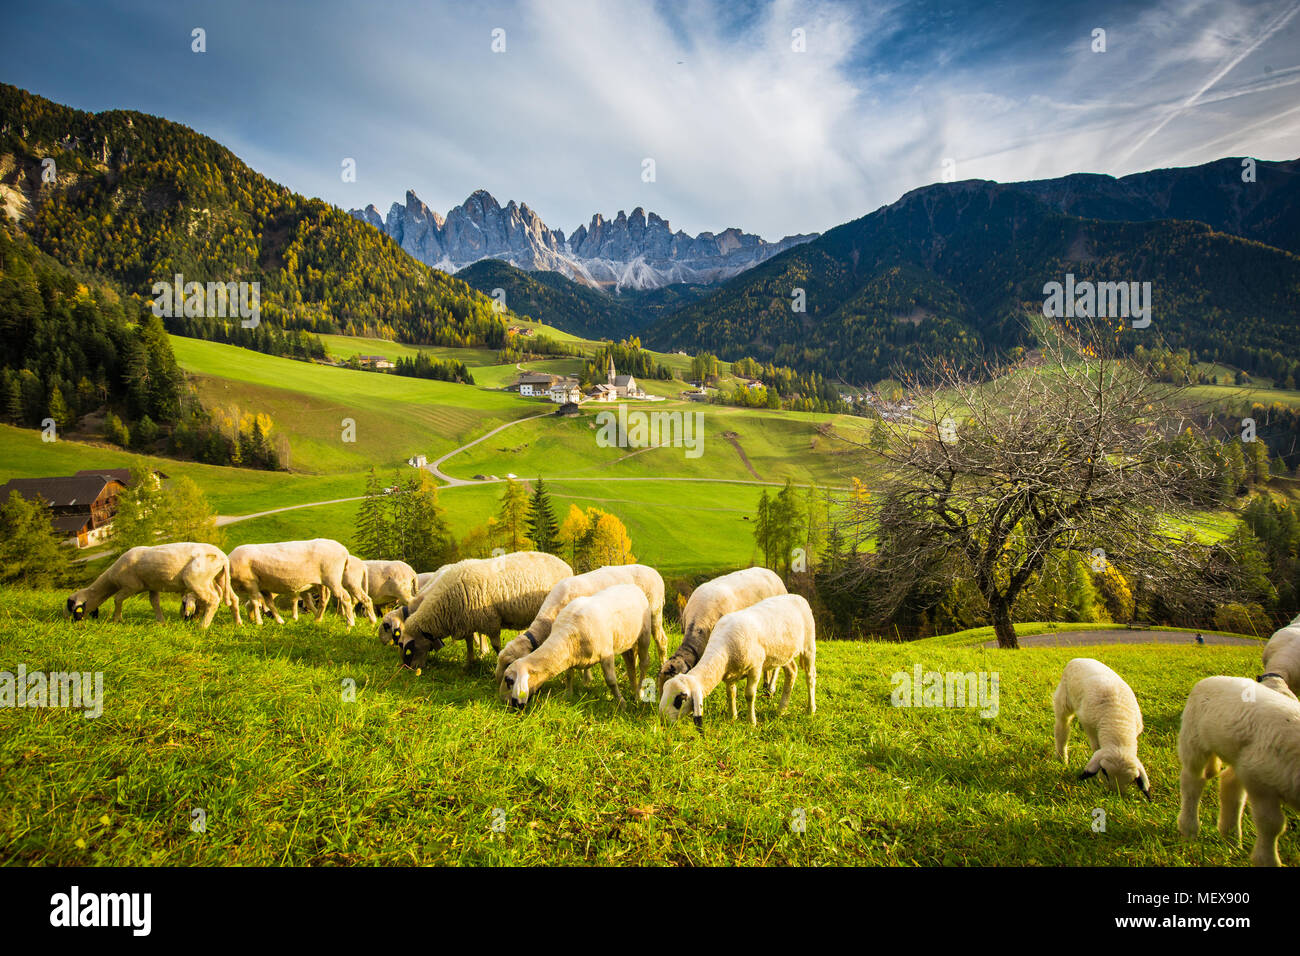 Beautiful view of idyllic mountain scenery in the Dolomites with famous Santa Maddelana mountain village and sheep grazing on green meadows Stock Photo